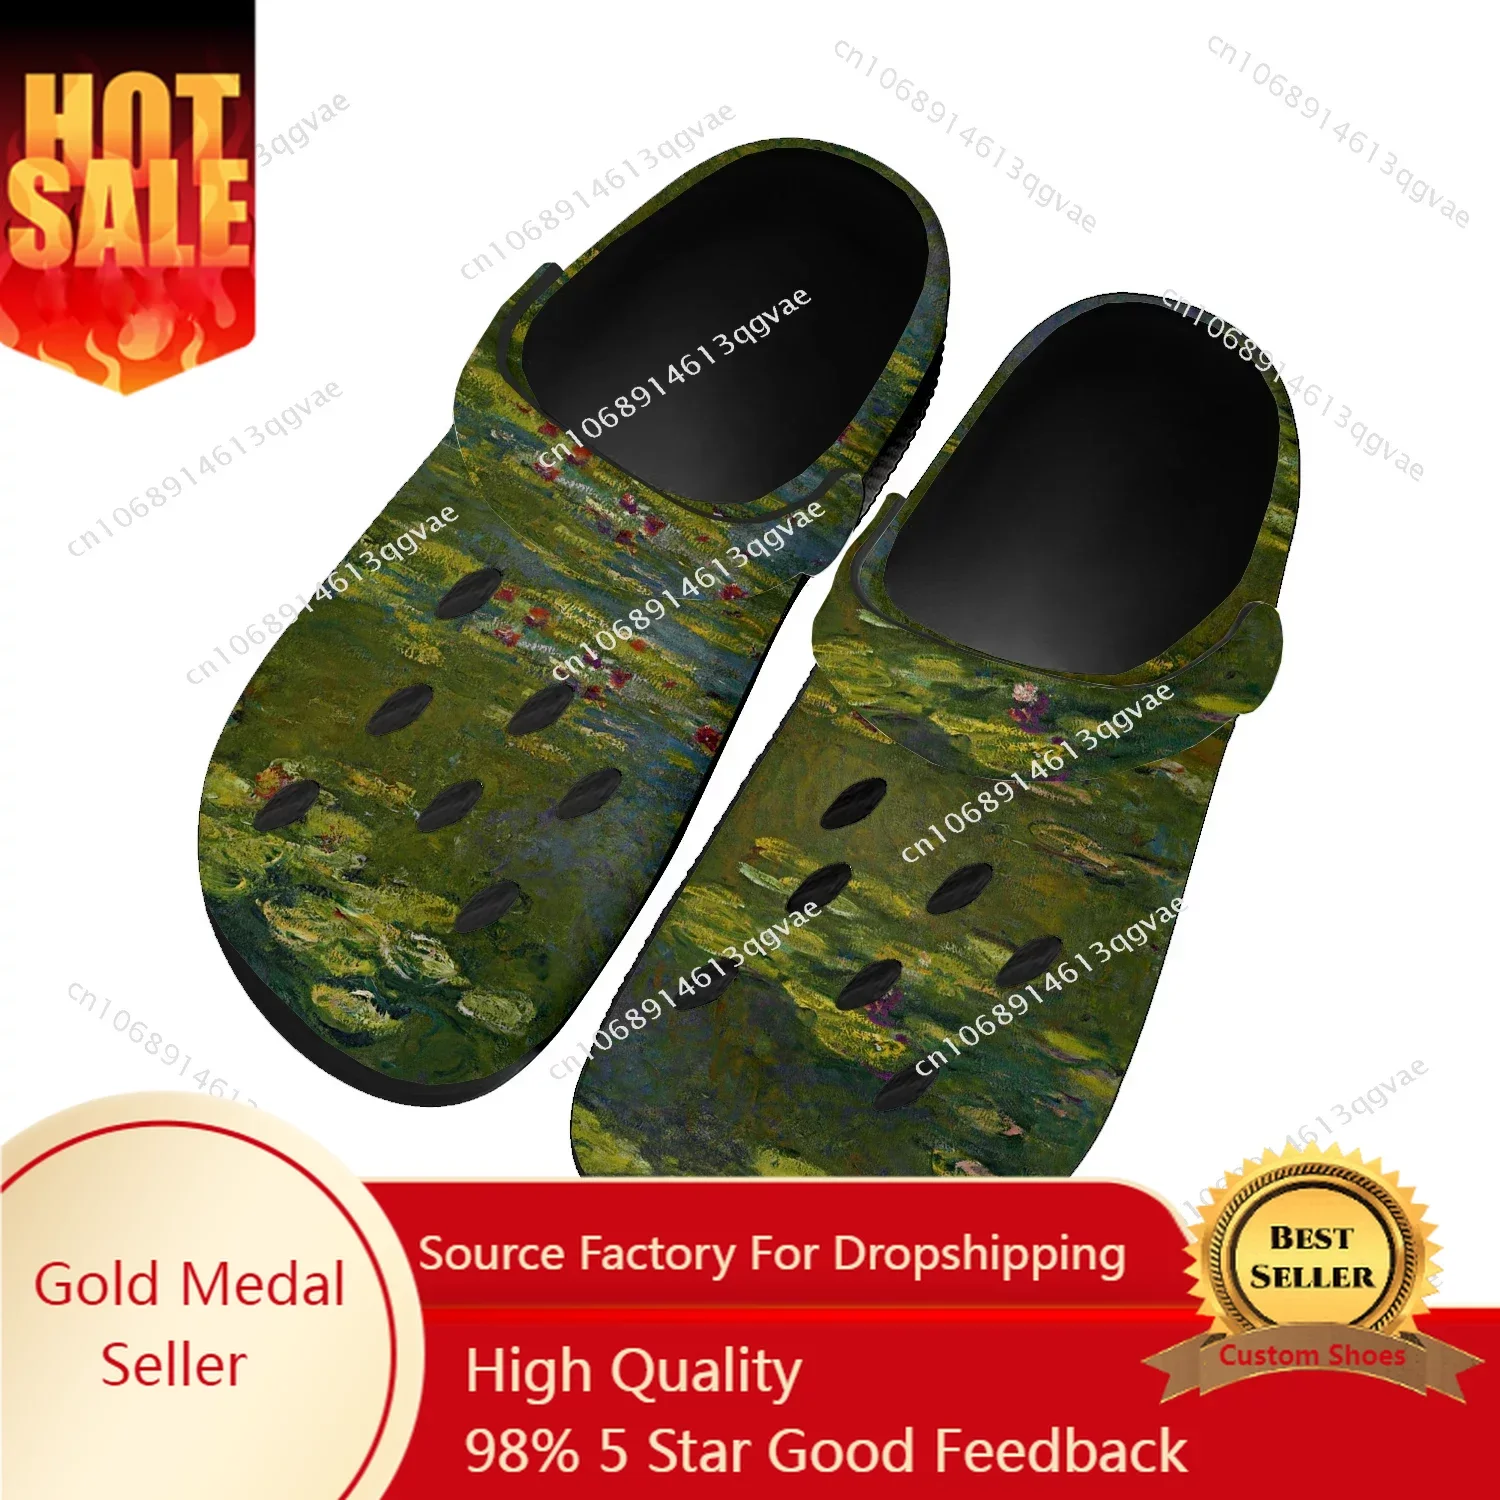 Monet Water Lilies Home Clog Mens Women Youth Boy Girl Sandals Shoes Garden Custom Made Breathable Shoe Beach Hole Slippers 2021 children sandals summer boy girl hole shoes eva kids garden for beach flat slip on shoes slippers water mules